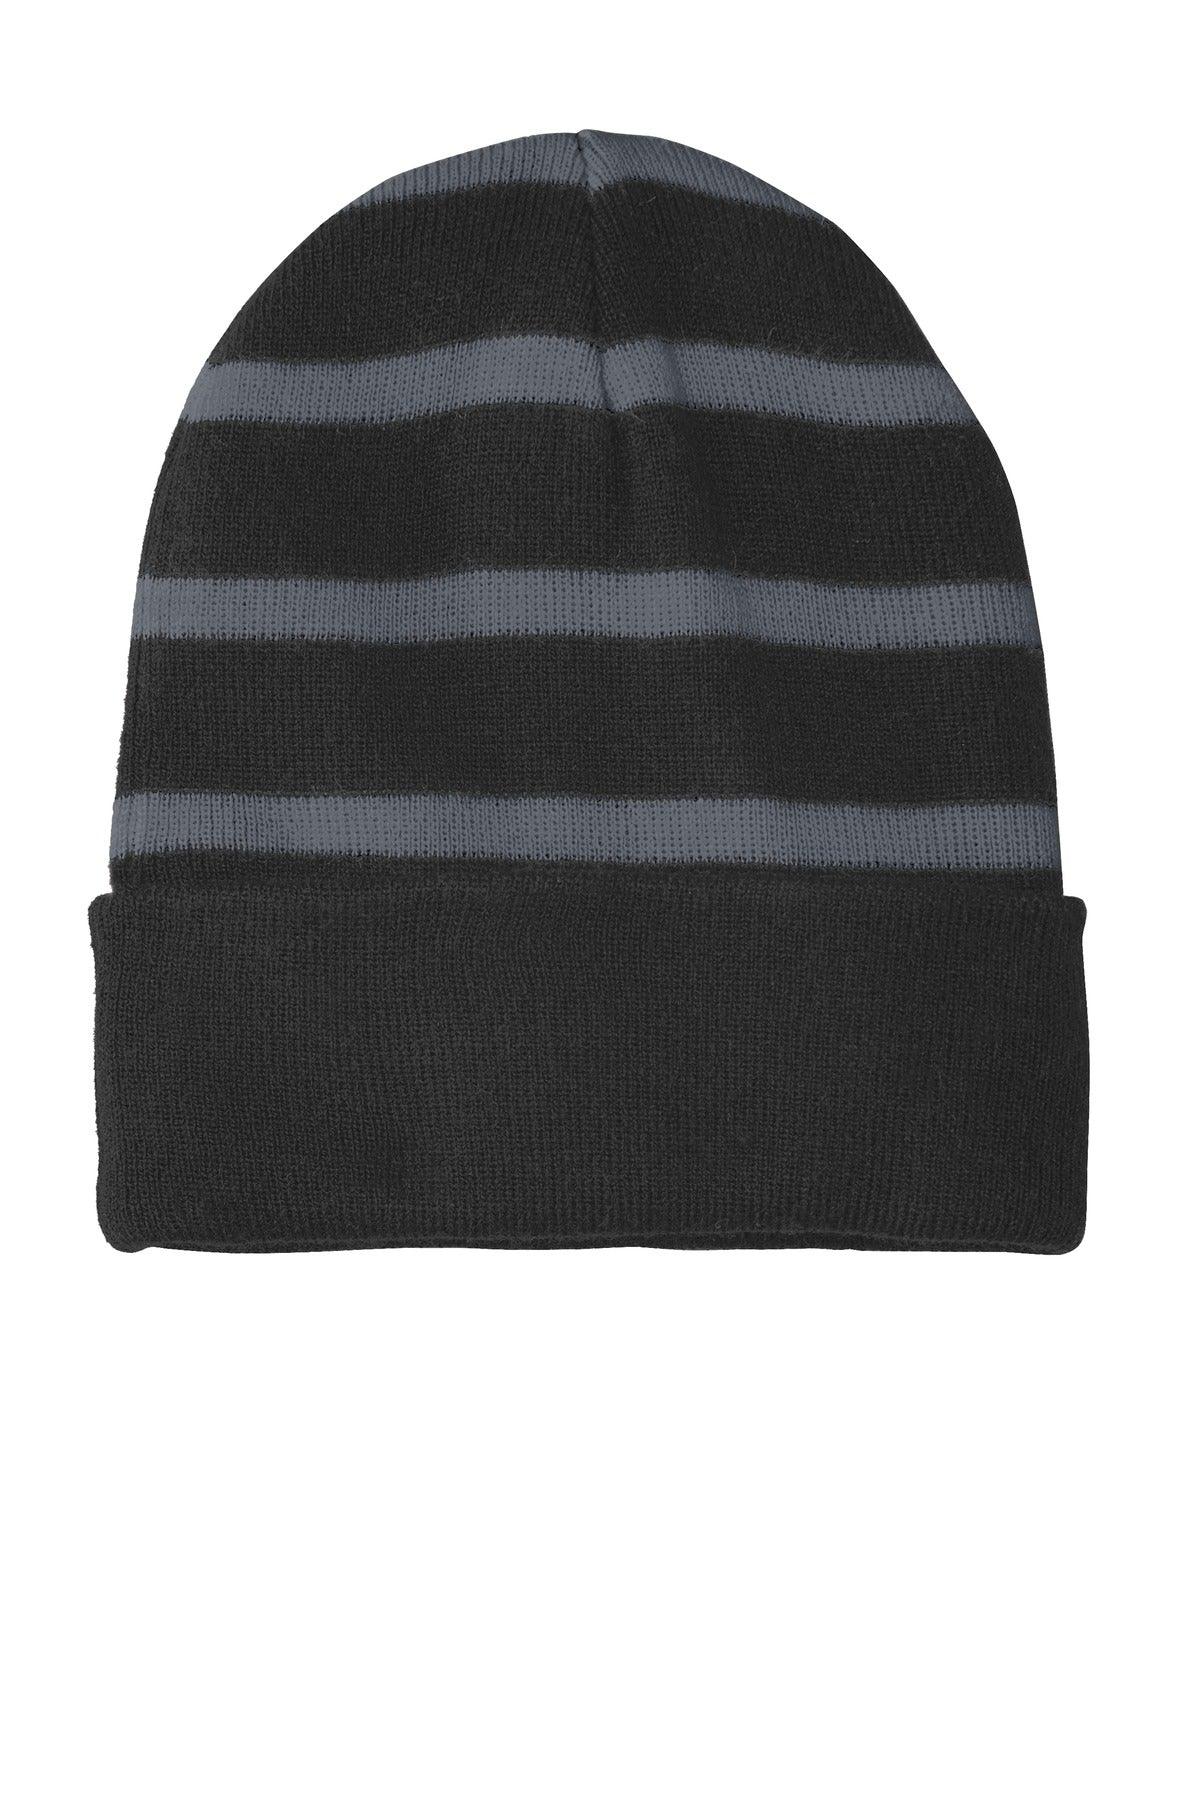 Sport-Tek Striped Beanie with Solid Band. STC31 - Dresses Max